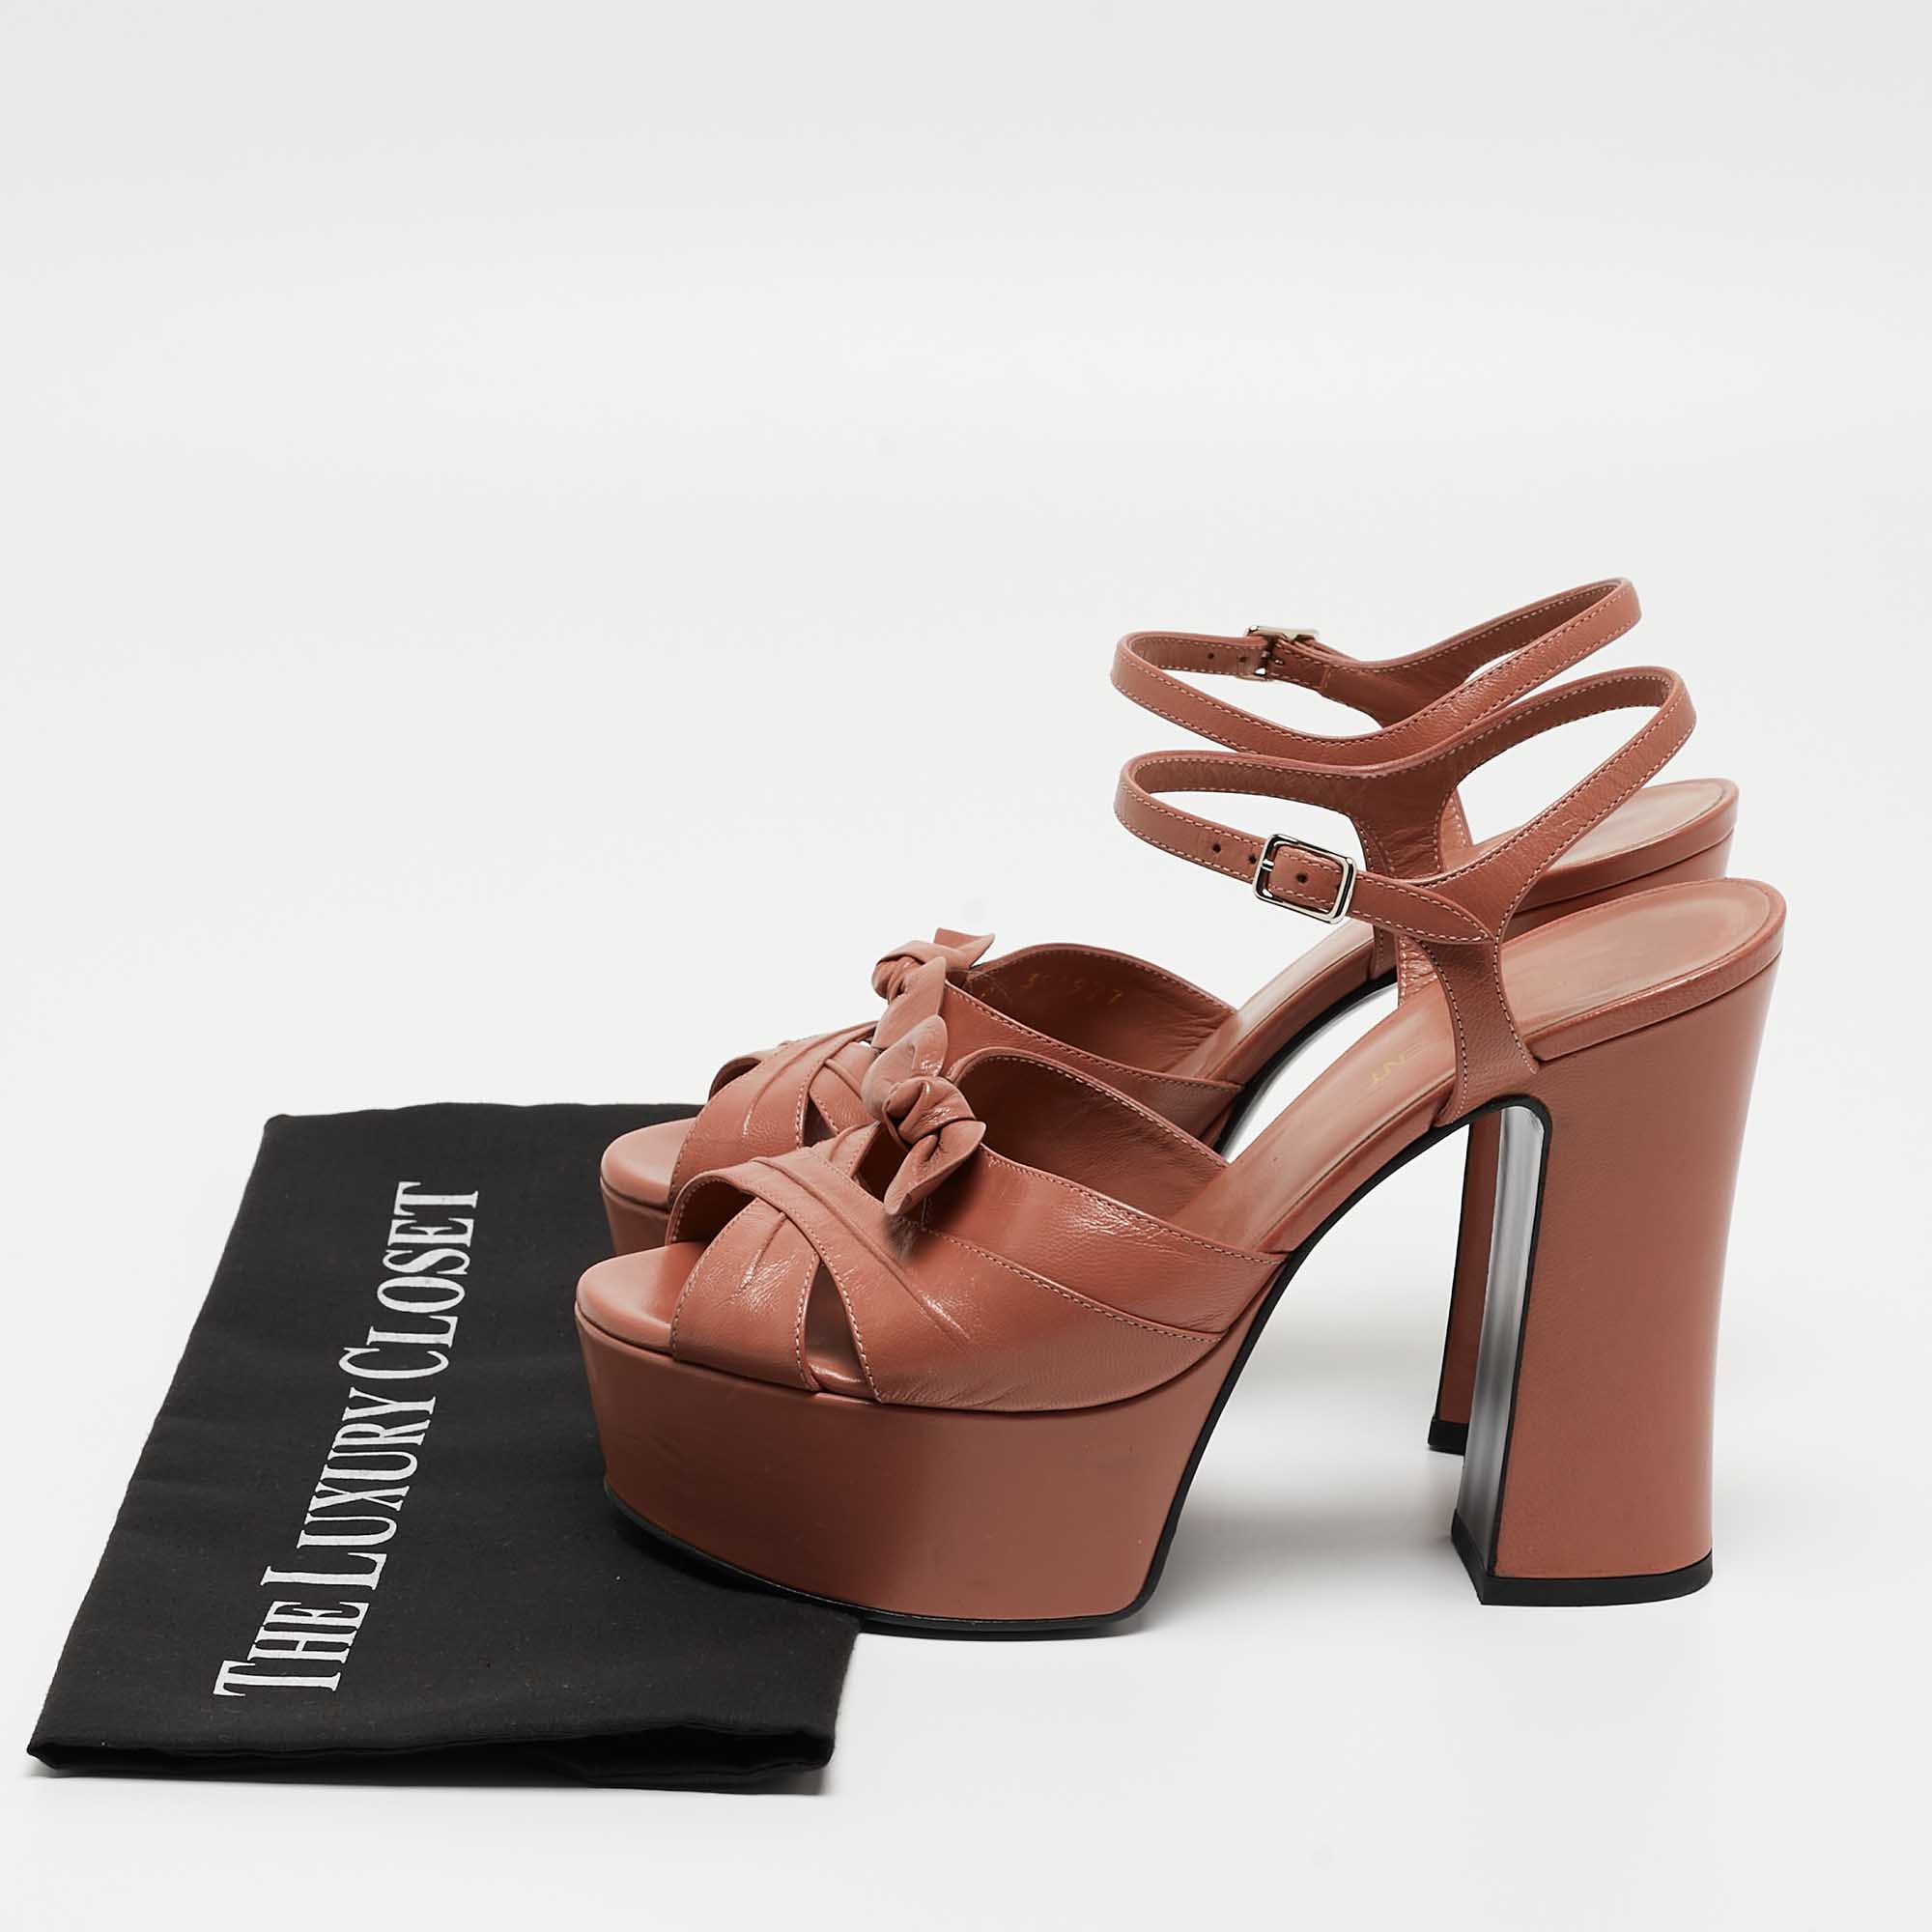 Saint Laurent Pink Leather Candy Bow Ankle Strap Sandals Size 37